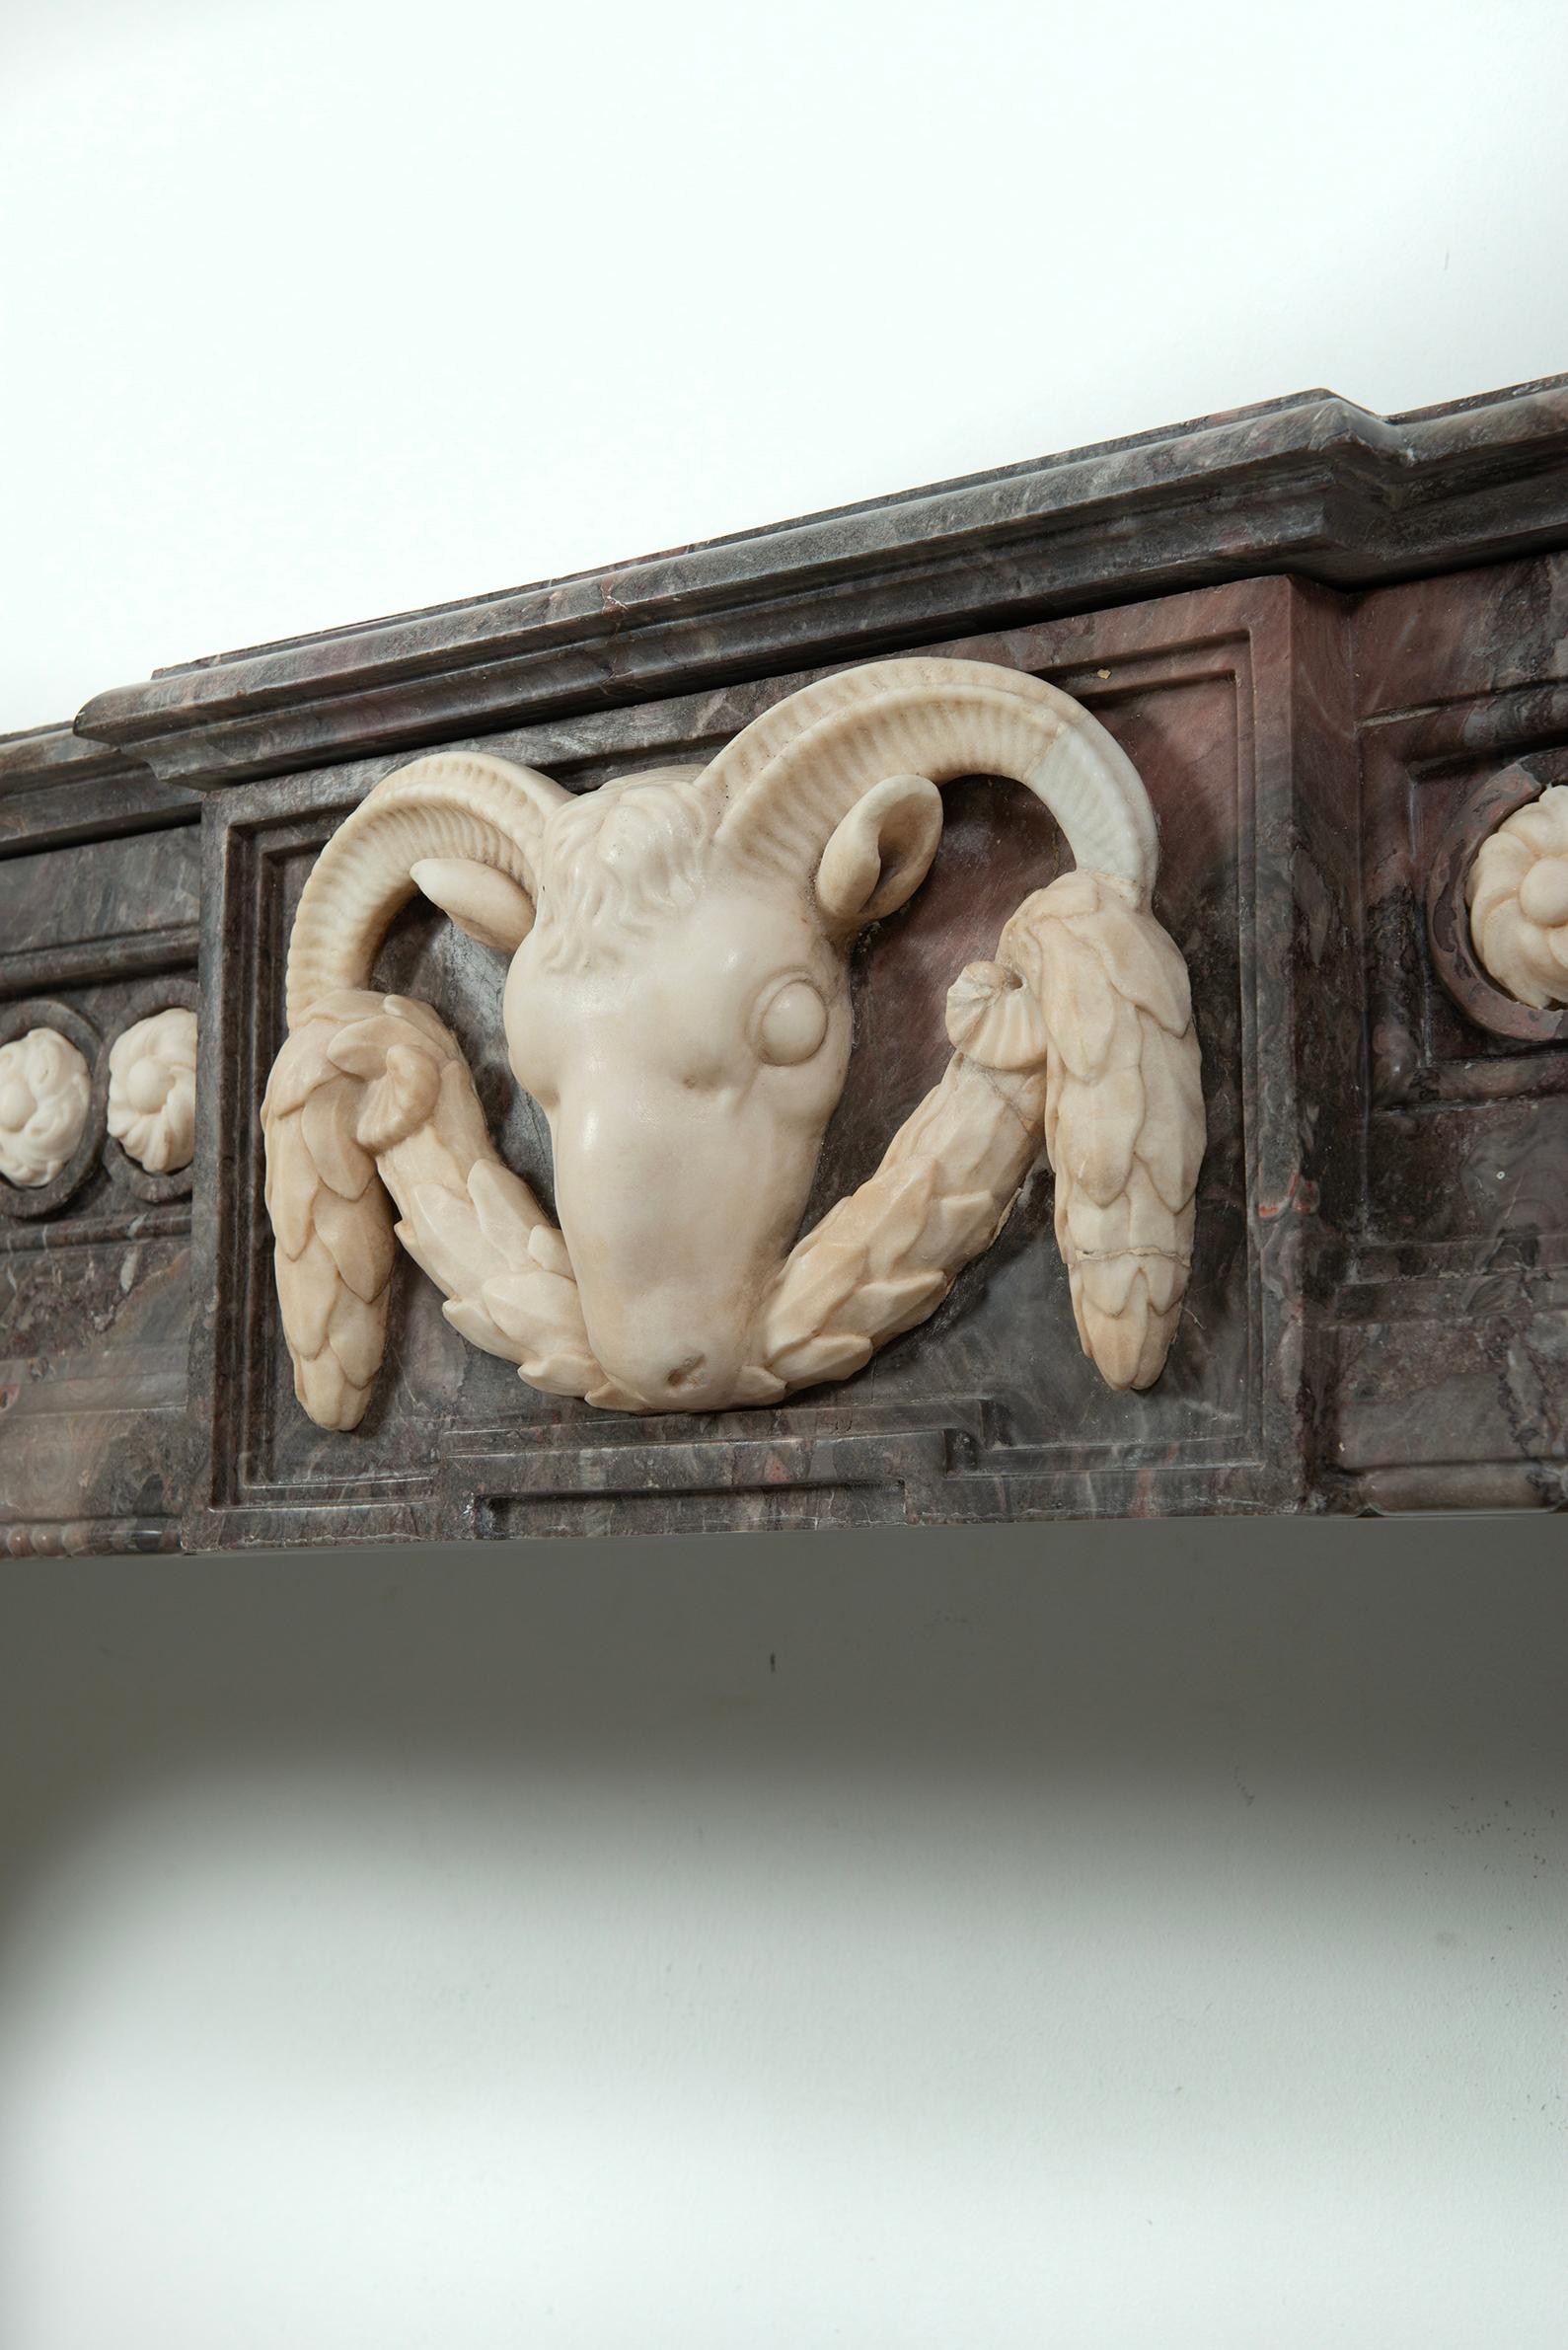 The Rams Head Fireplace For Sale 15